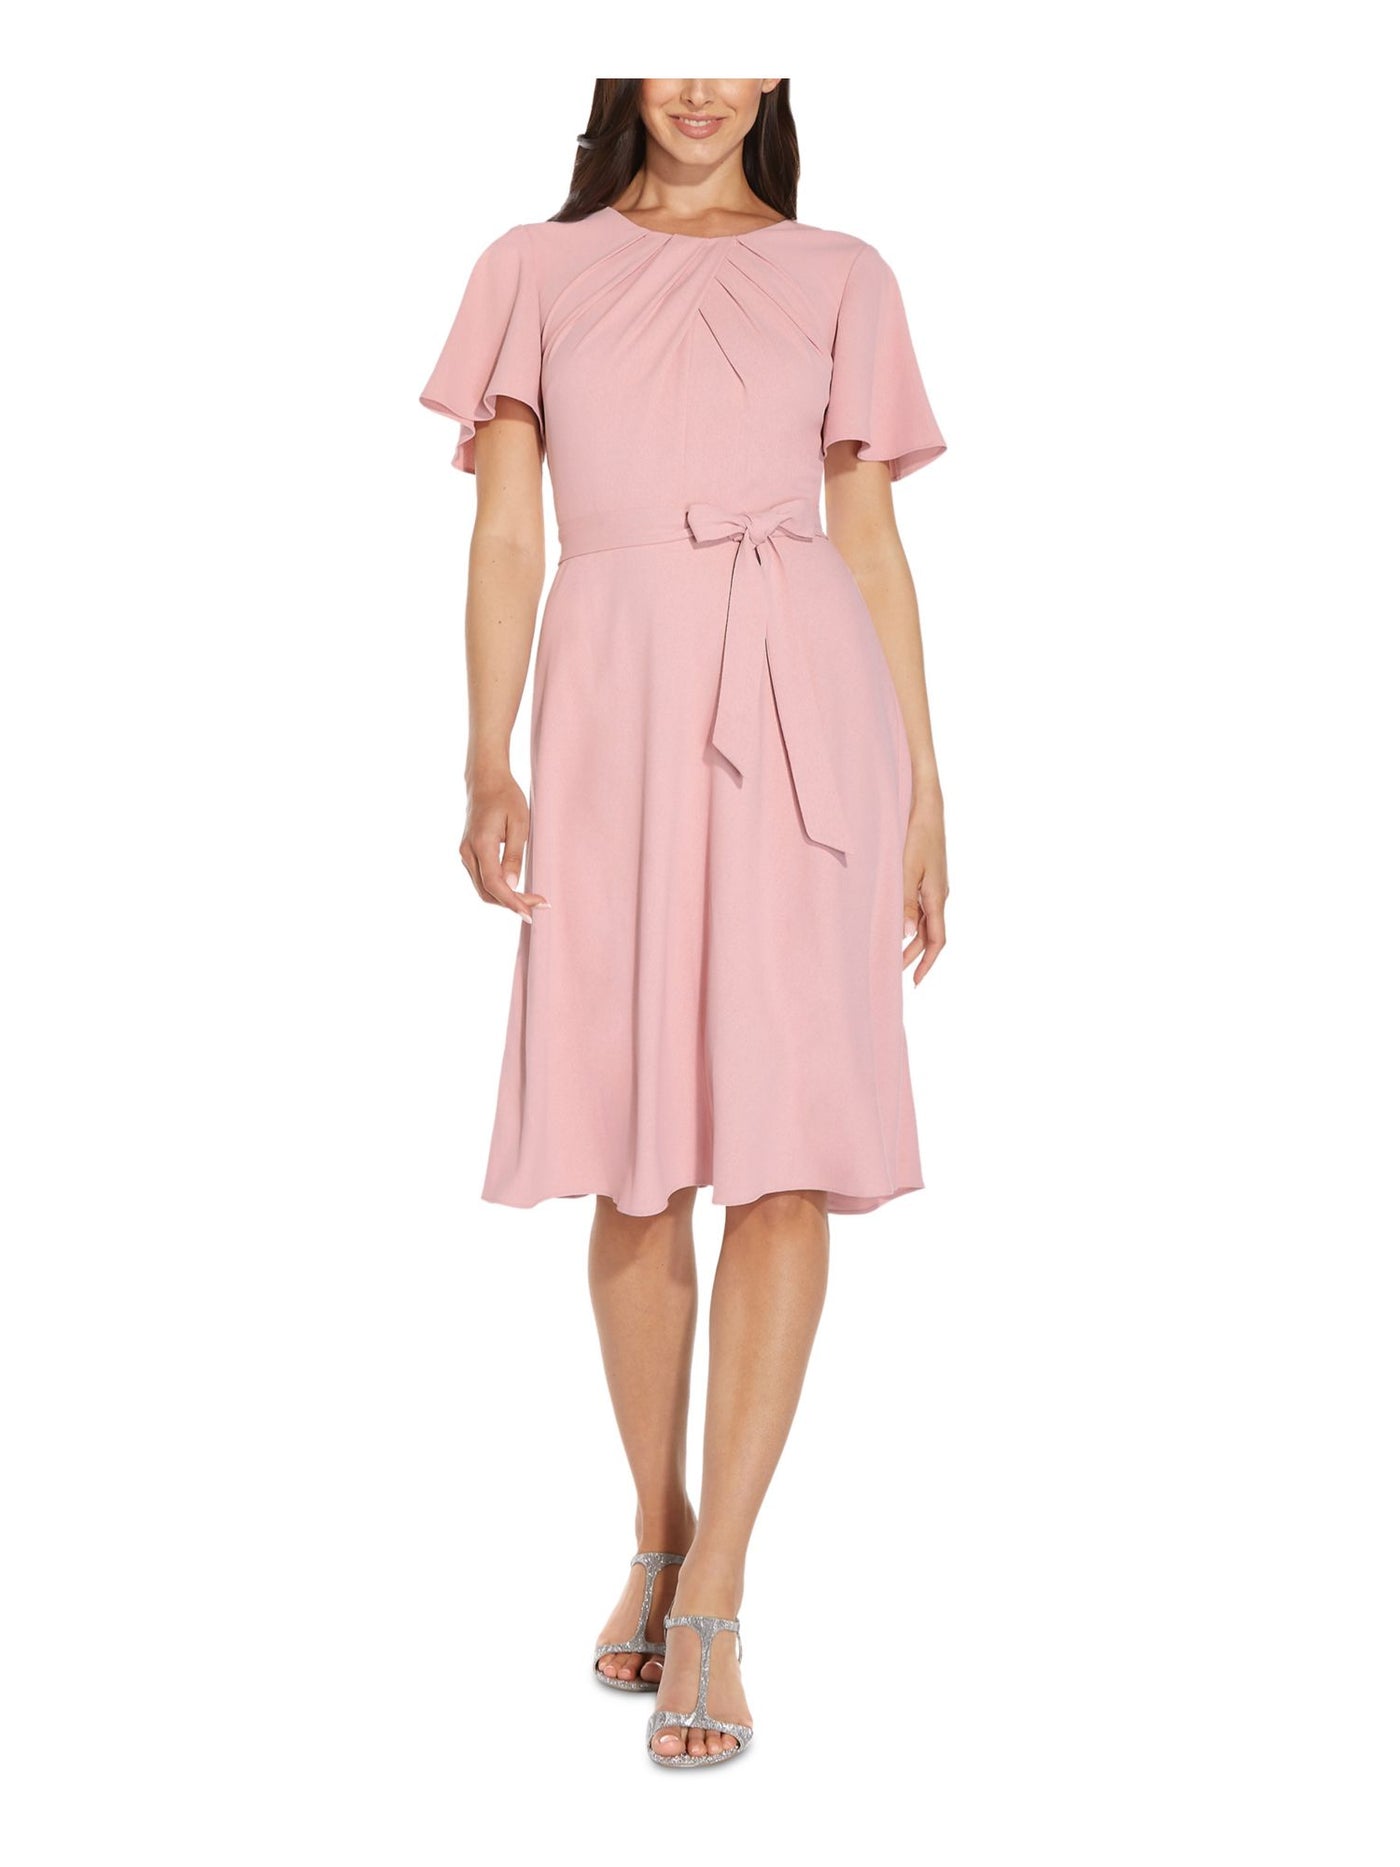 ADRIANNA PAPELL Womens Pink Tie Flutter Sleeve Crew Neck Knee Length Wear To Work Fit + Flare Dress 14